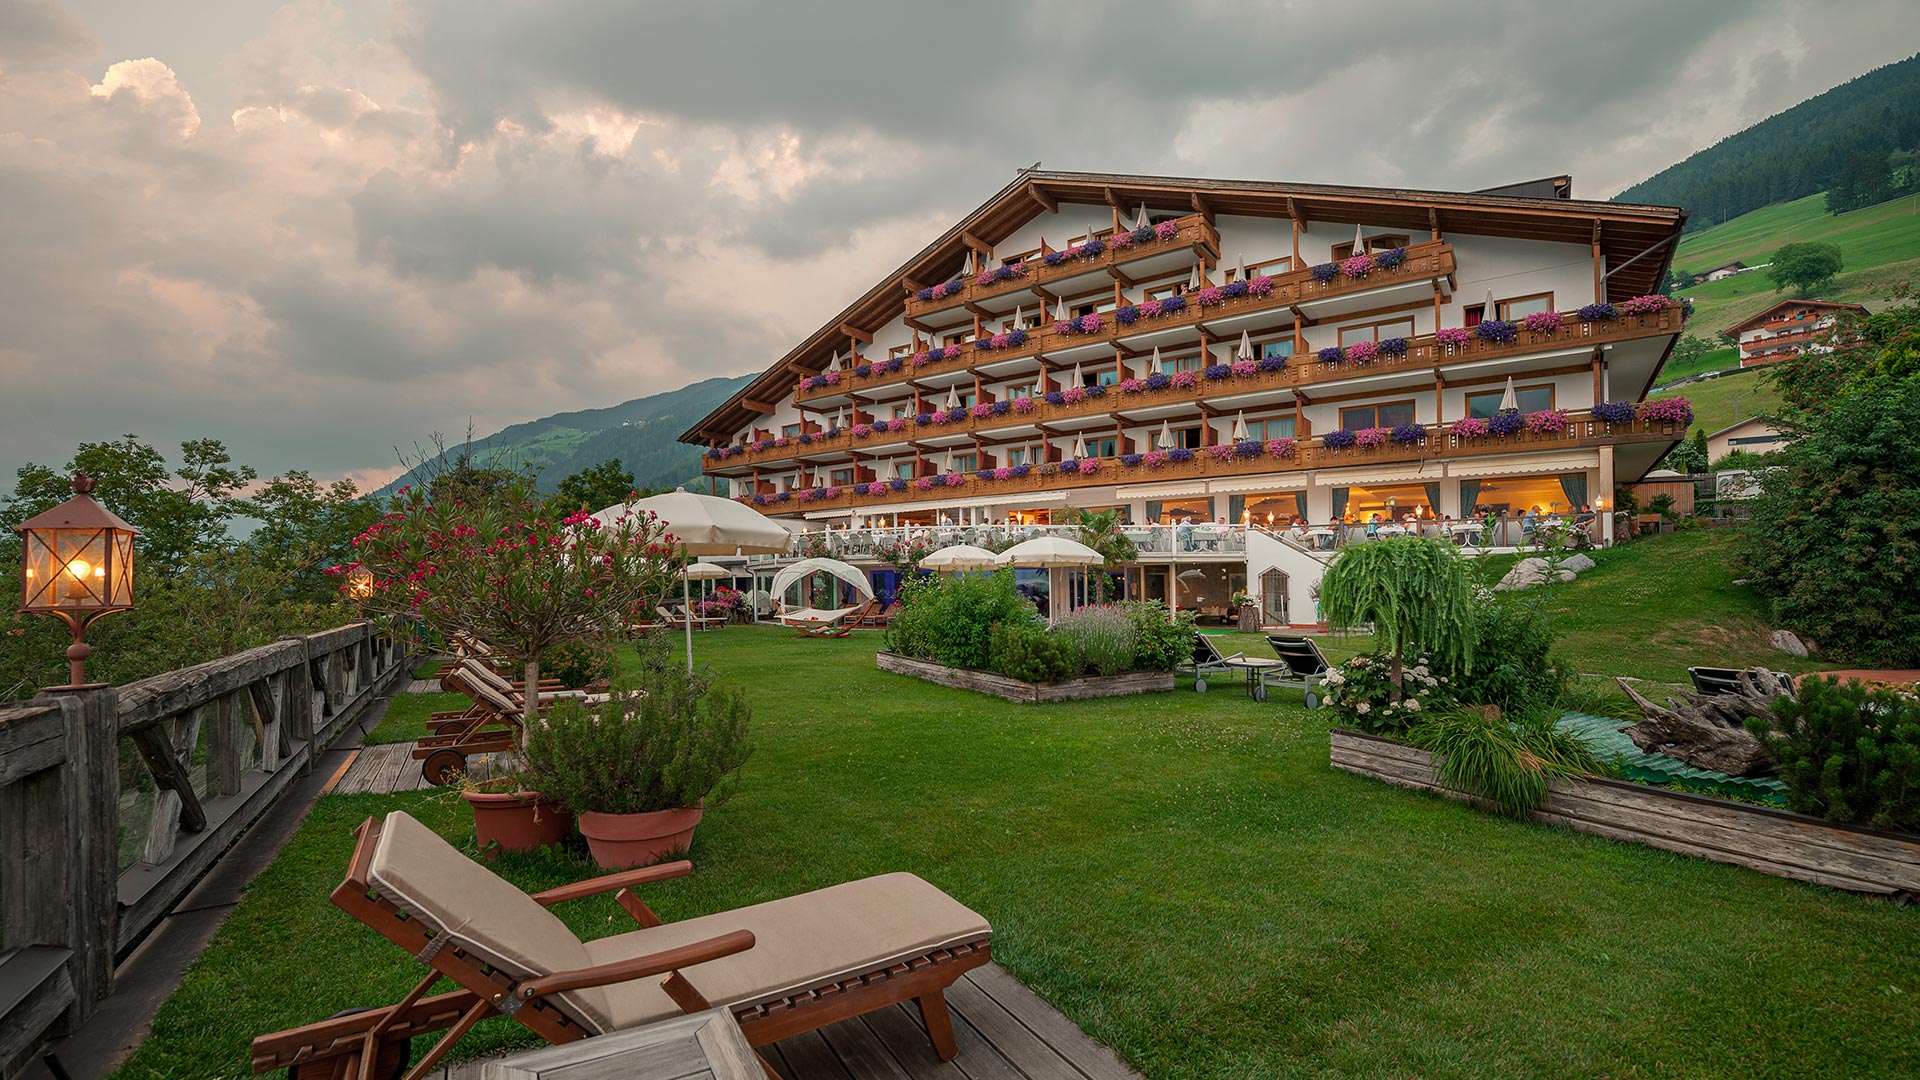 Book a holiday in our 4 S-star Hotel in Schenna: put aside your routine and dedicate your time to regeneration!